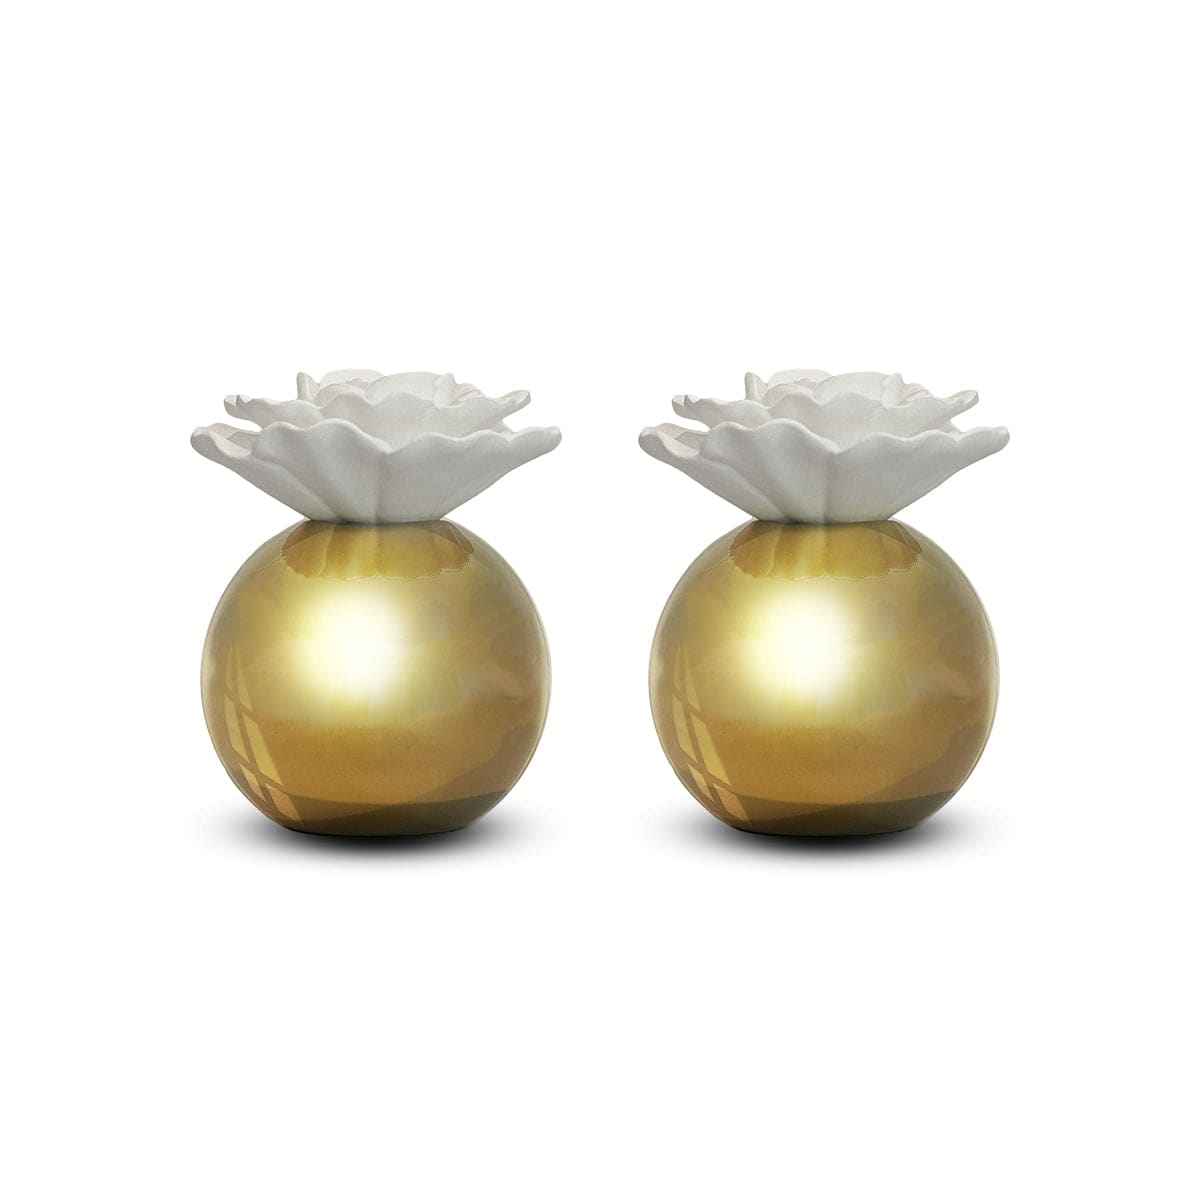 Hysses Home Scents Default Orion Gold Clay Diffuser Set of 2, Bergamot Sandalwood & Geranium Rosemary